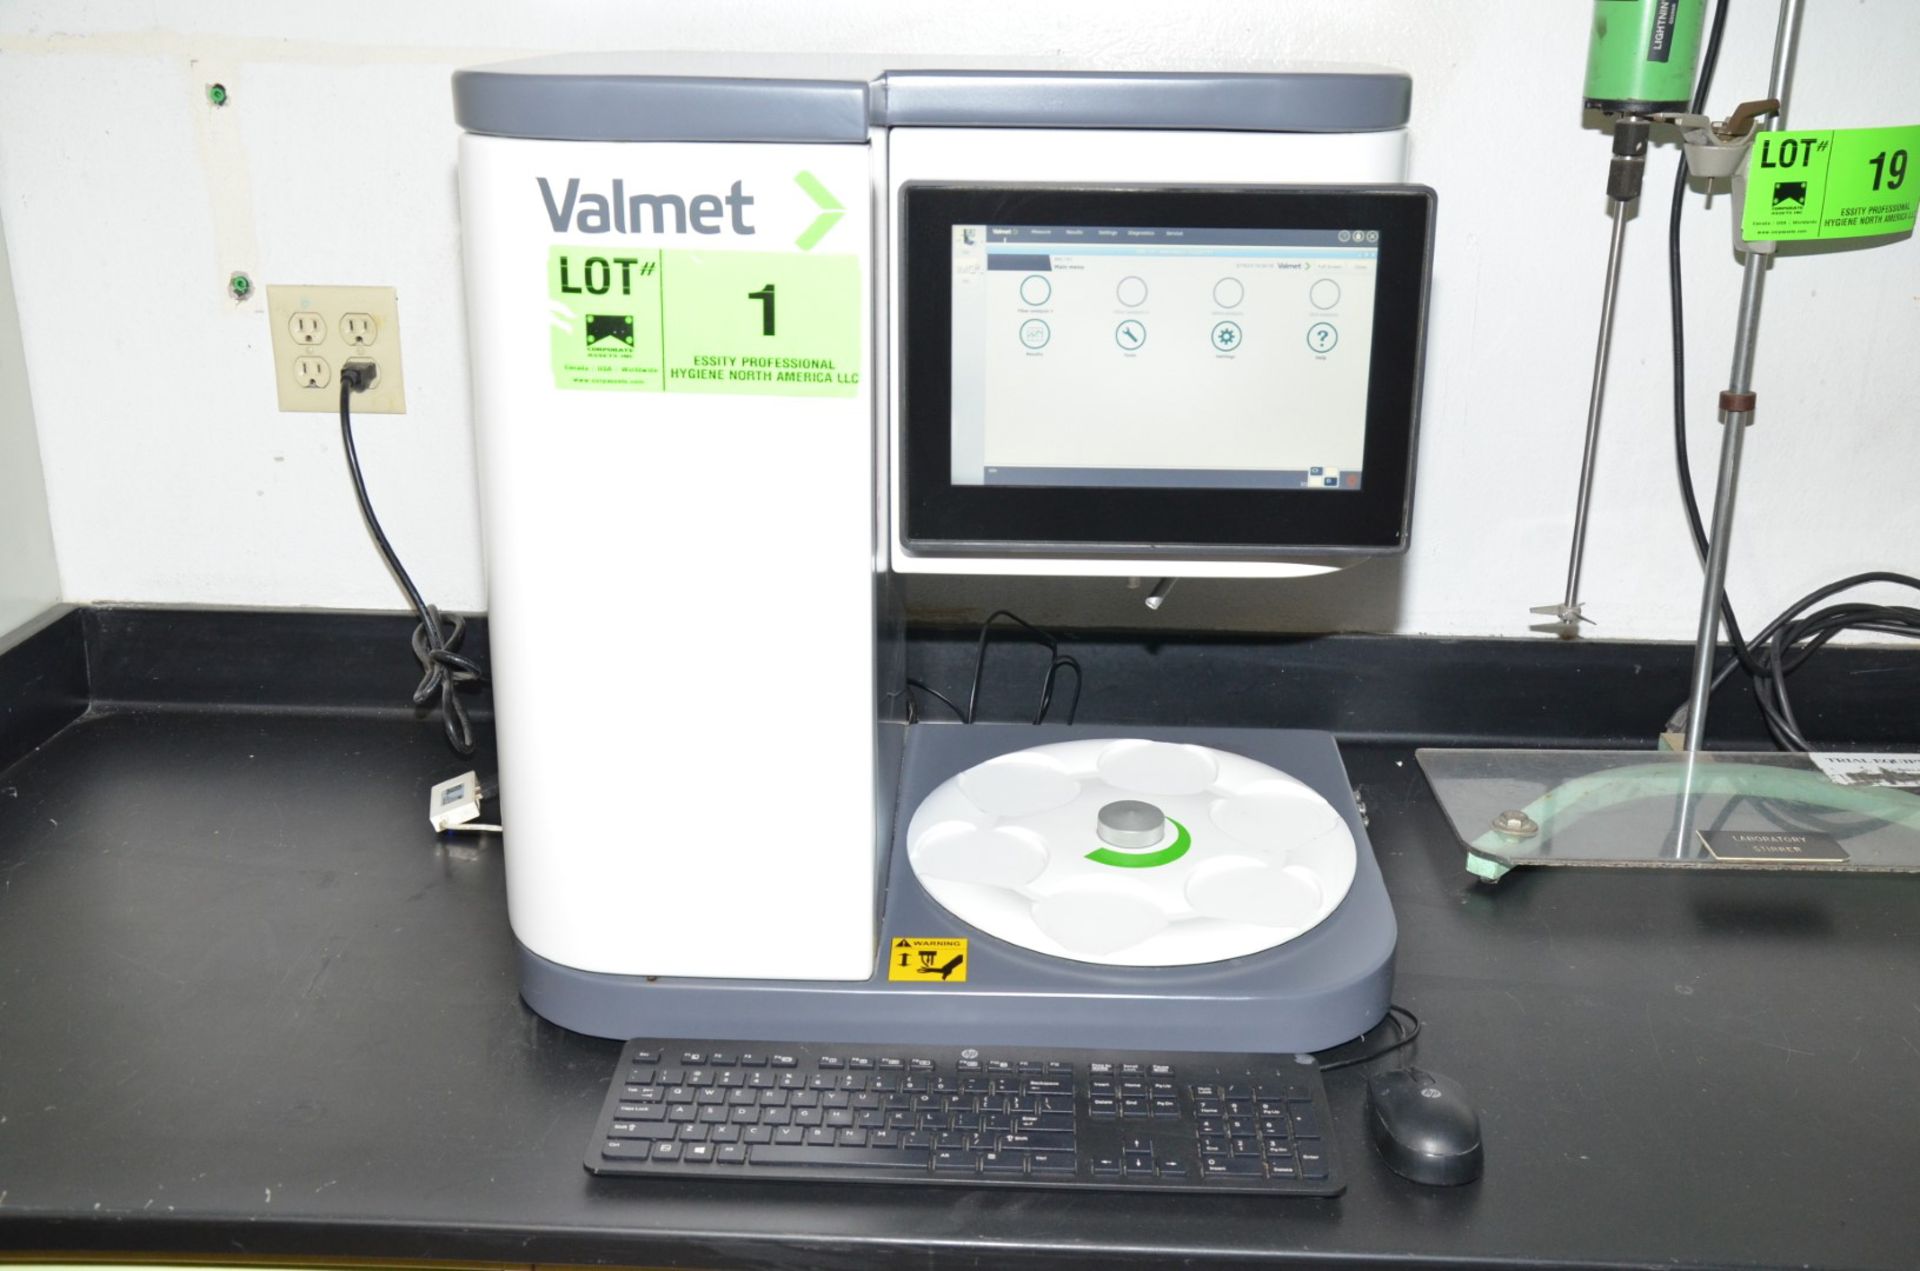 VALMET (2017) FS5 OPTICAL FIBER IMAGE ANALYZER WITH VALMET AUTOMATION VER 2.3 DIGITAL TOUCH SCREEN - Image 3 of 10